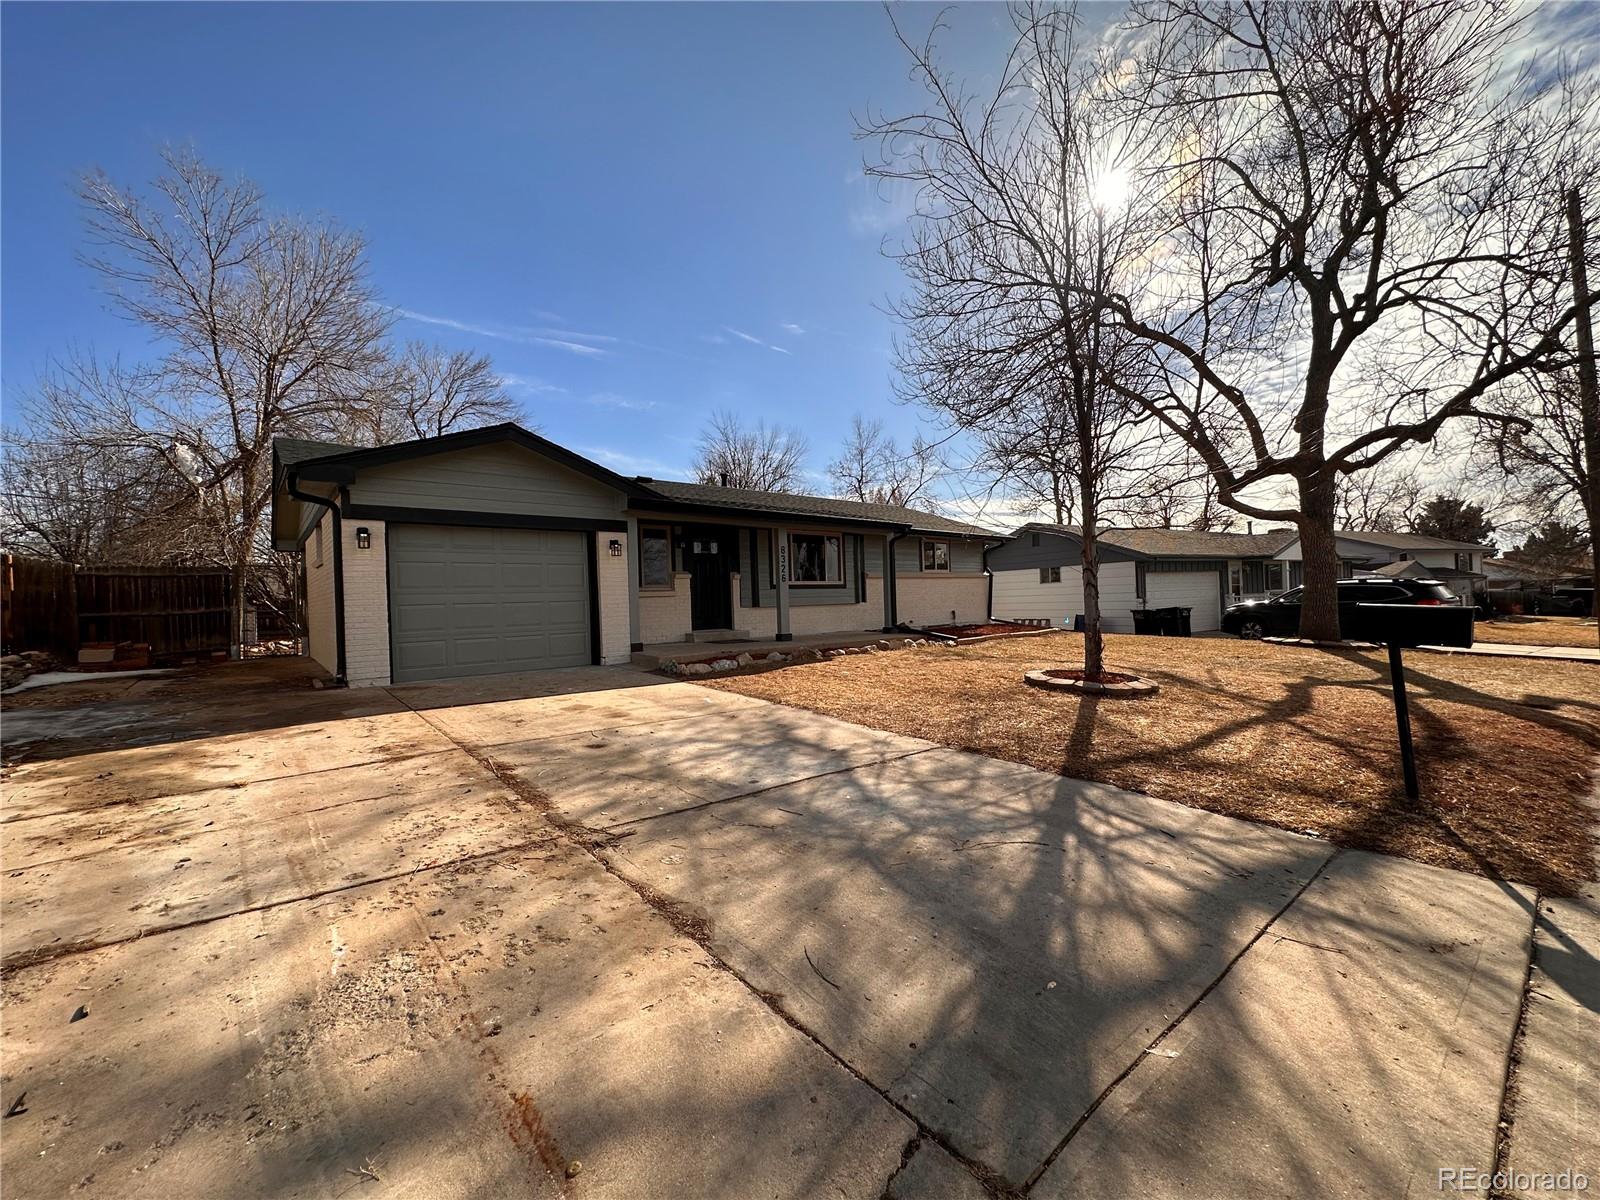 8326  fenton way, Arvada sold home. Closed on 2024-03-01 for $620,000.